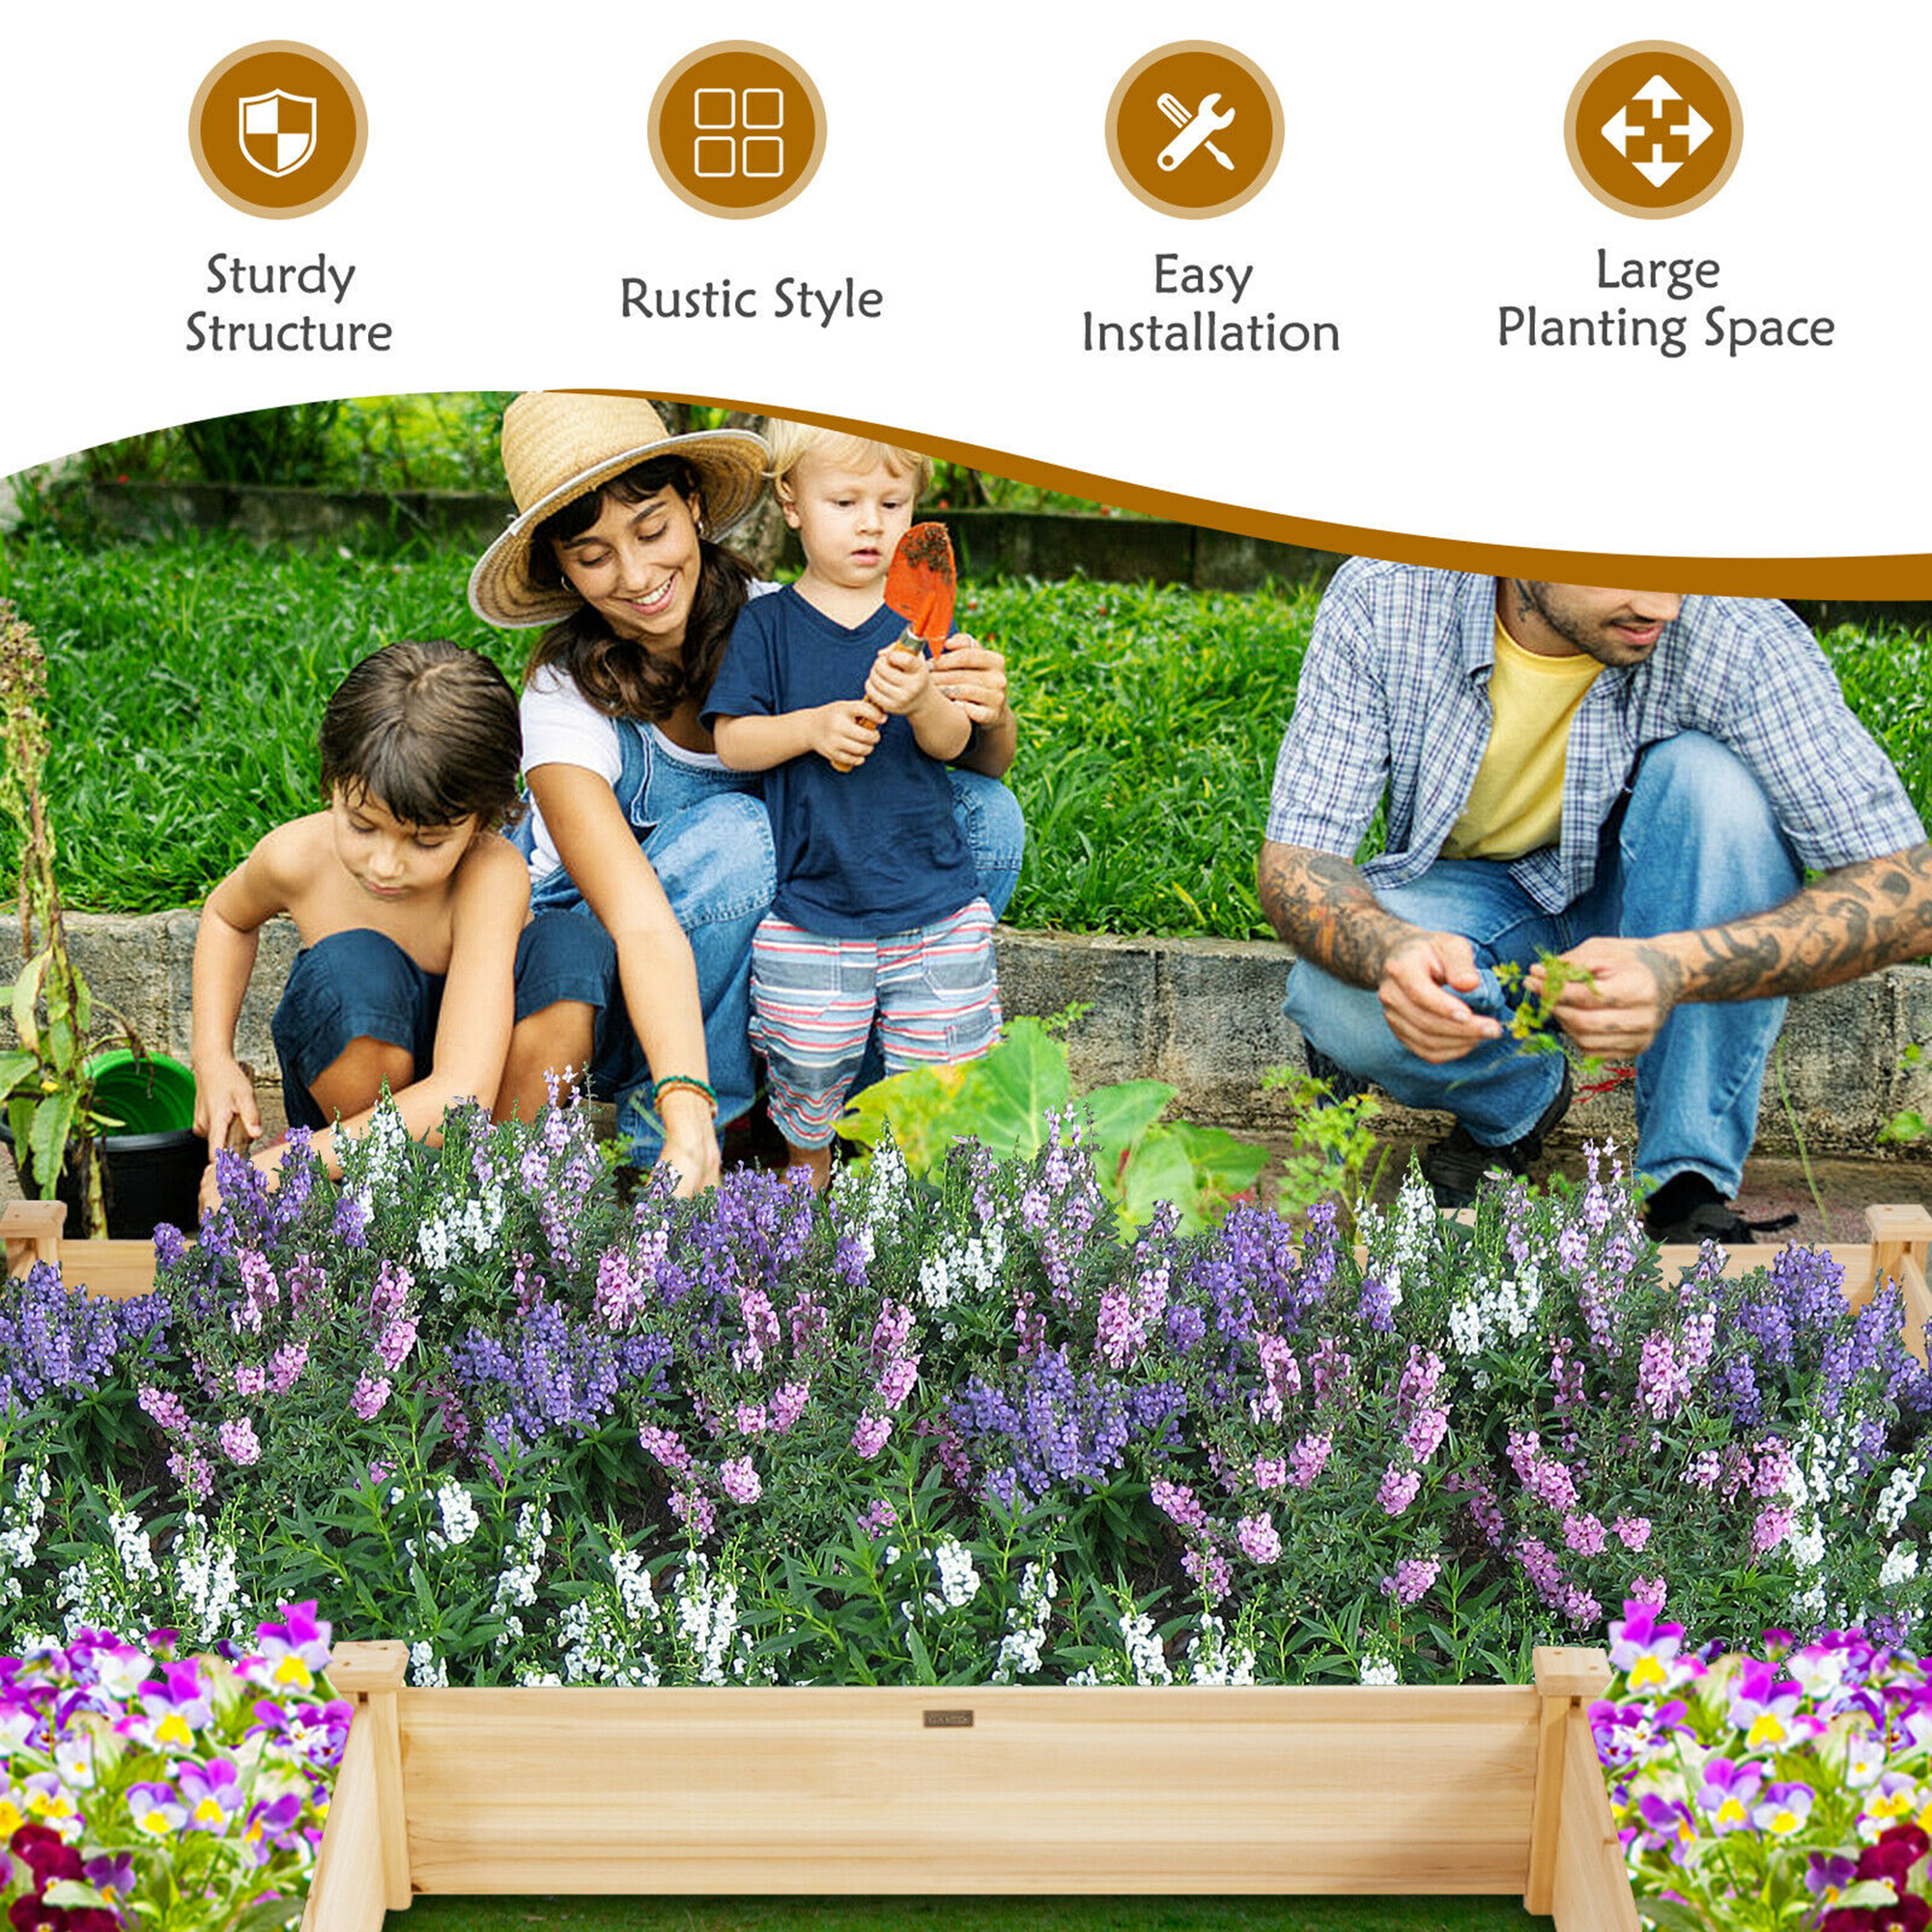 Gymax Raised Garden Bed 92.5x95x11in Wooden Garden Box Planter Container U-Shaped Bed - image 5 of 10